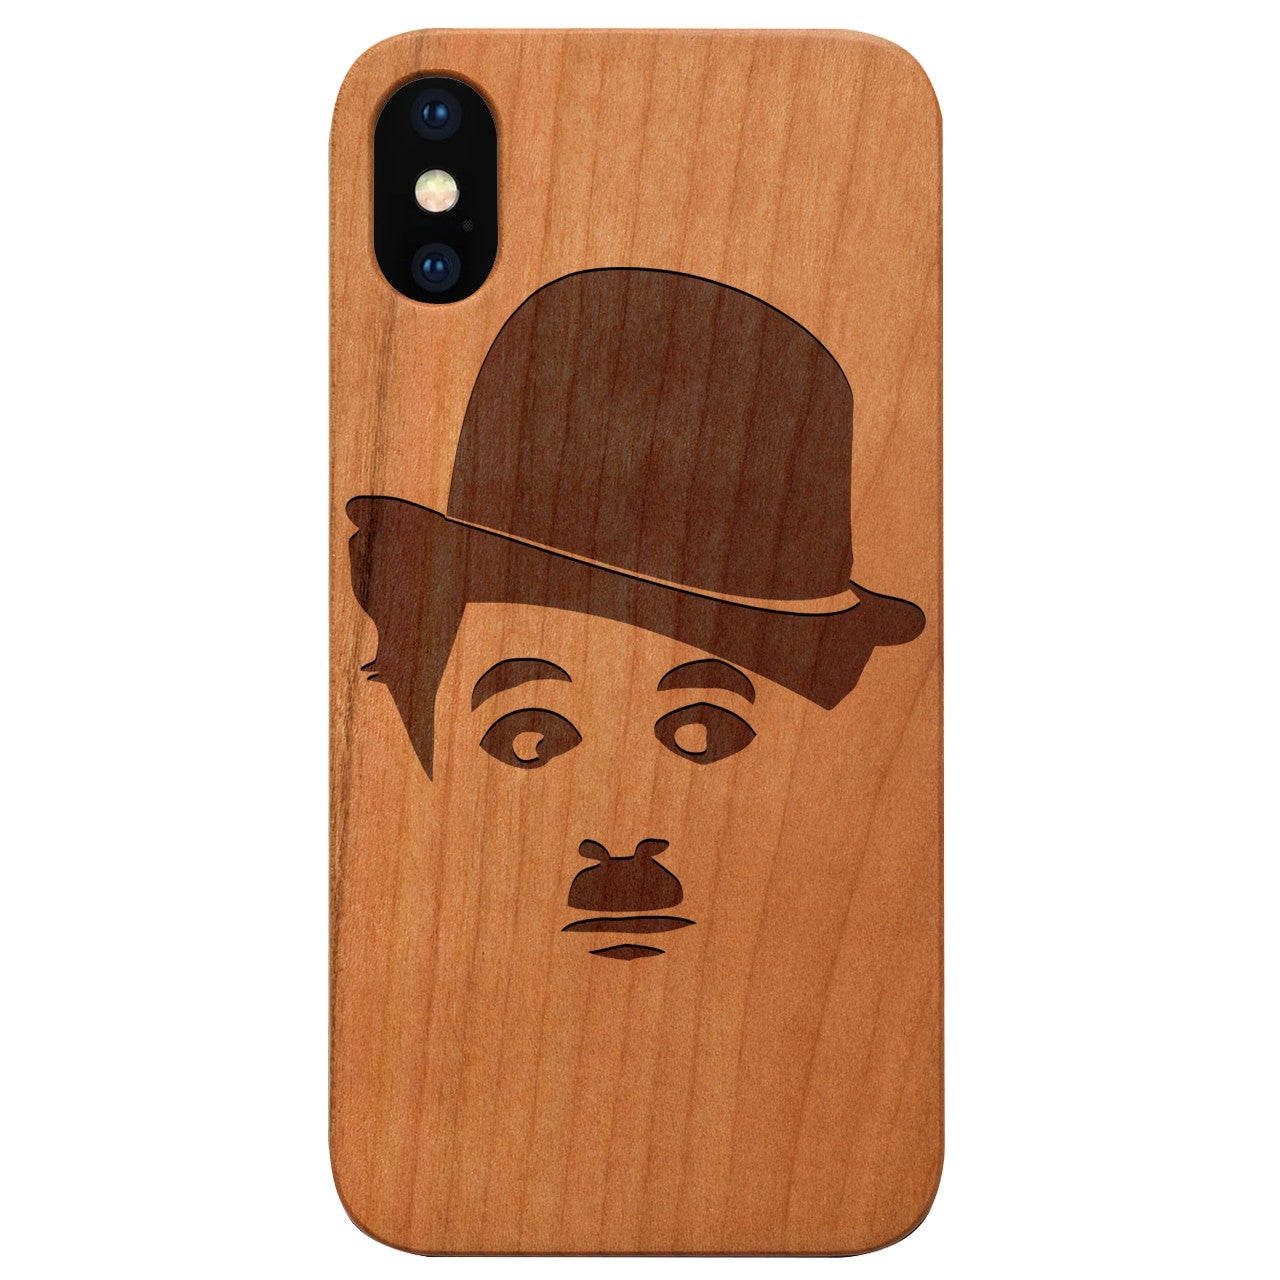  Charlie Chaplin 1 - Engraved - Wooden Phone Case - IPhone 13 Models